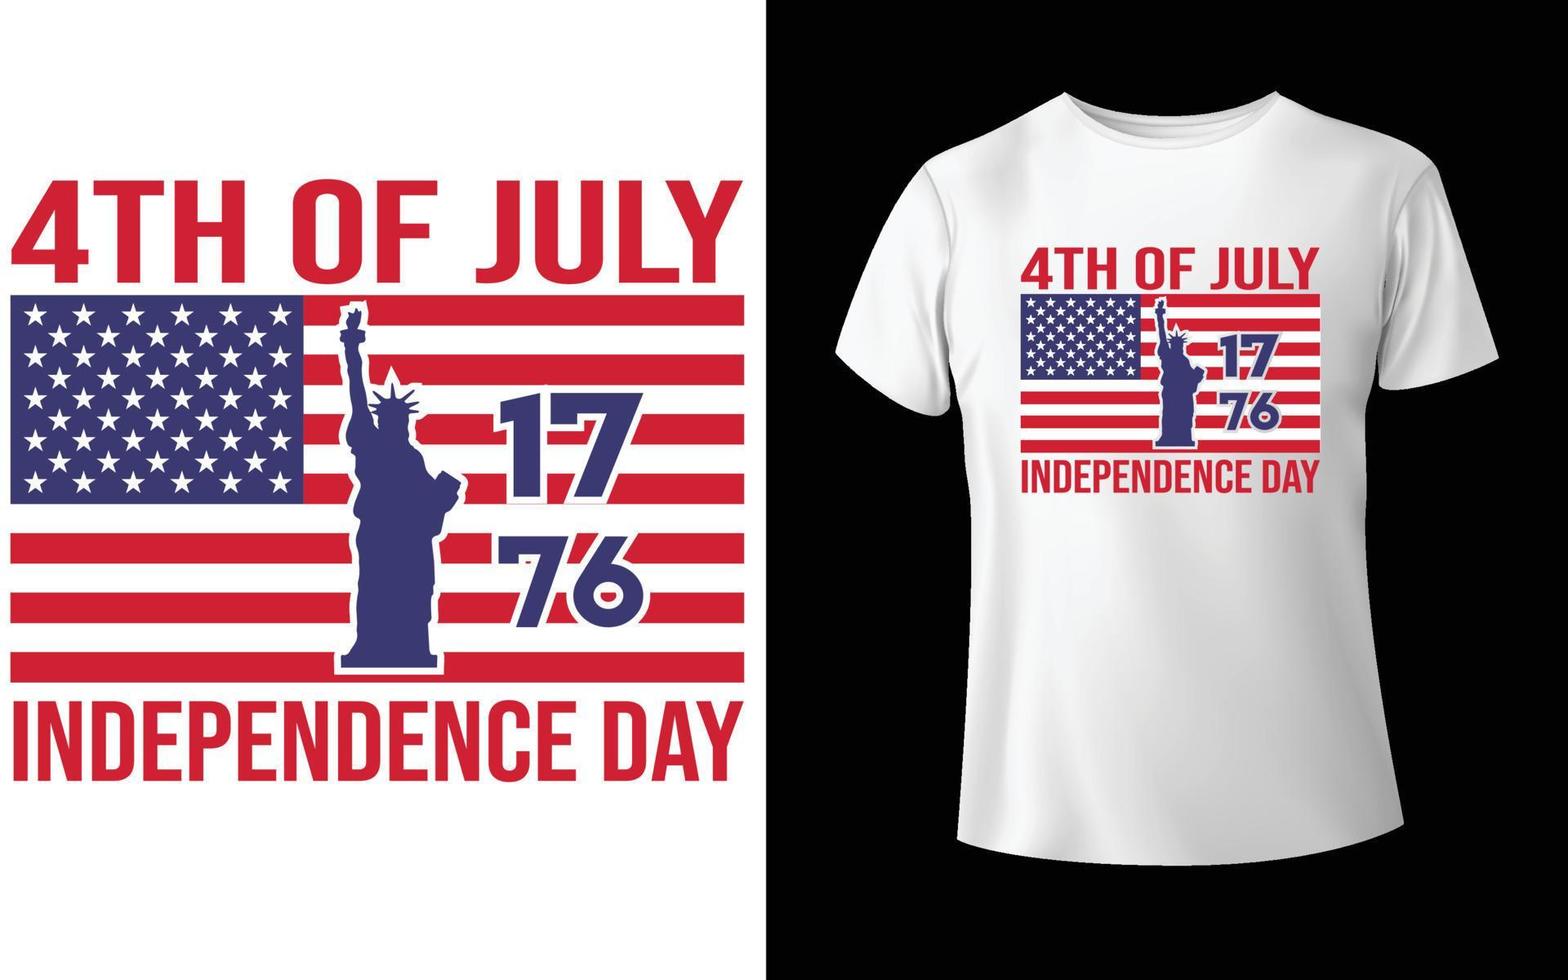 Happy 4th July independence day t-shirt design, 4th of july independence day t-shirt design, 4th of july 1776 independence day t-shirt design, vector